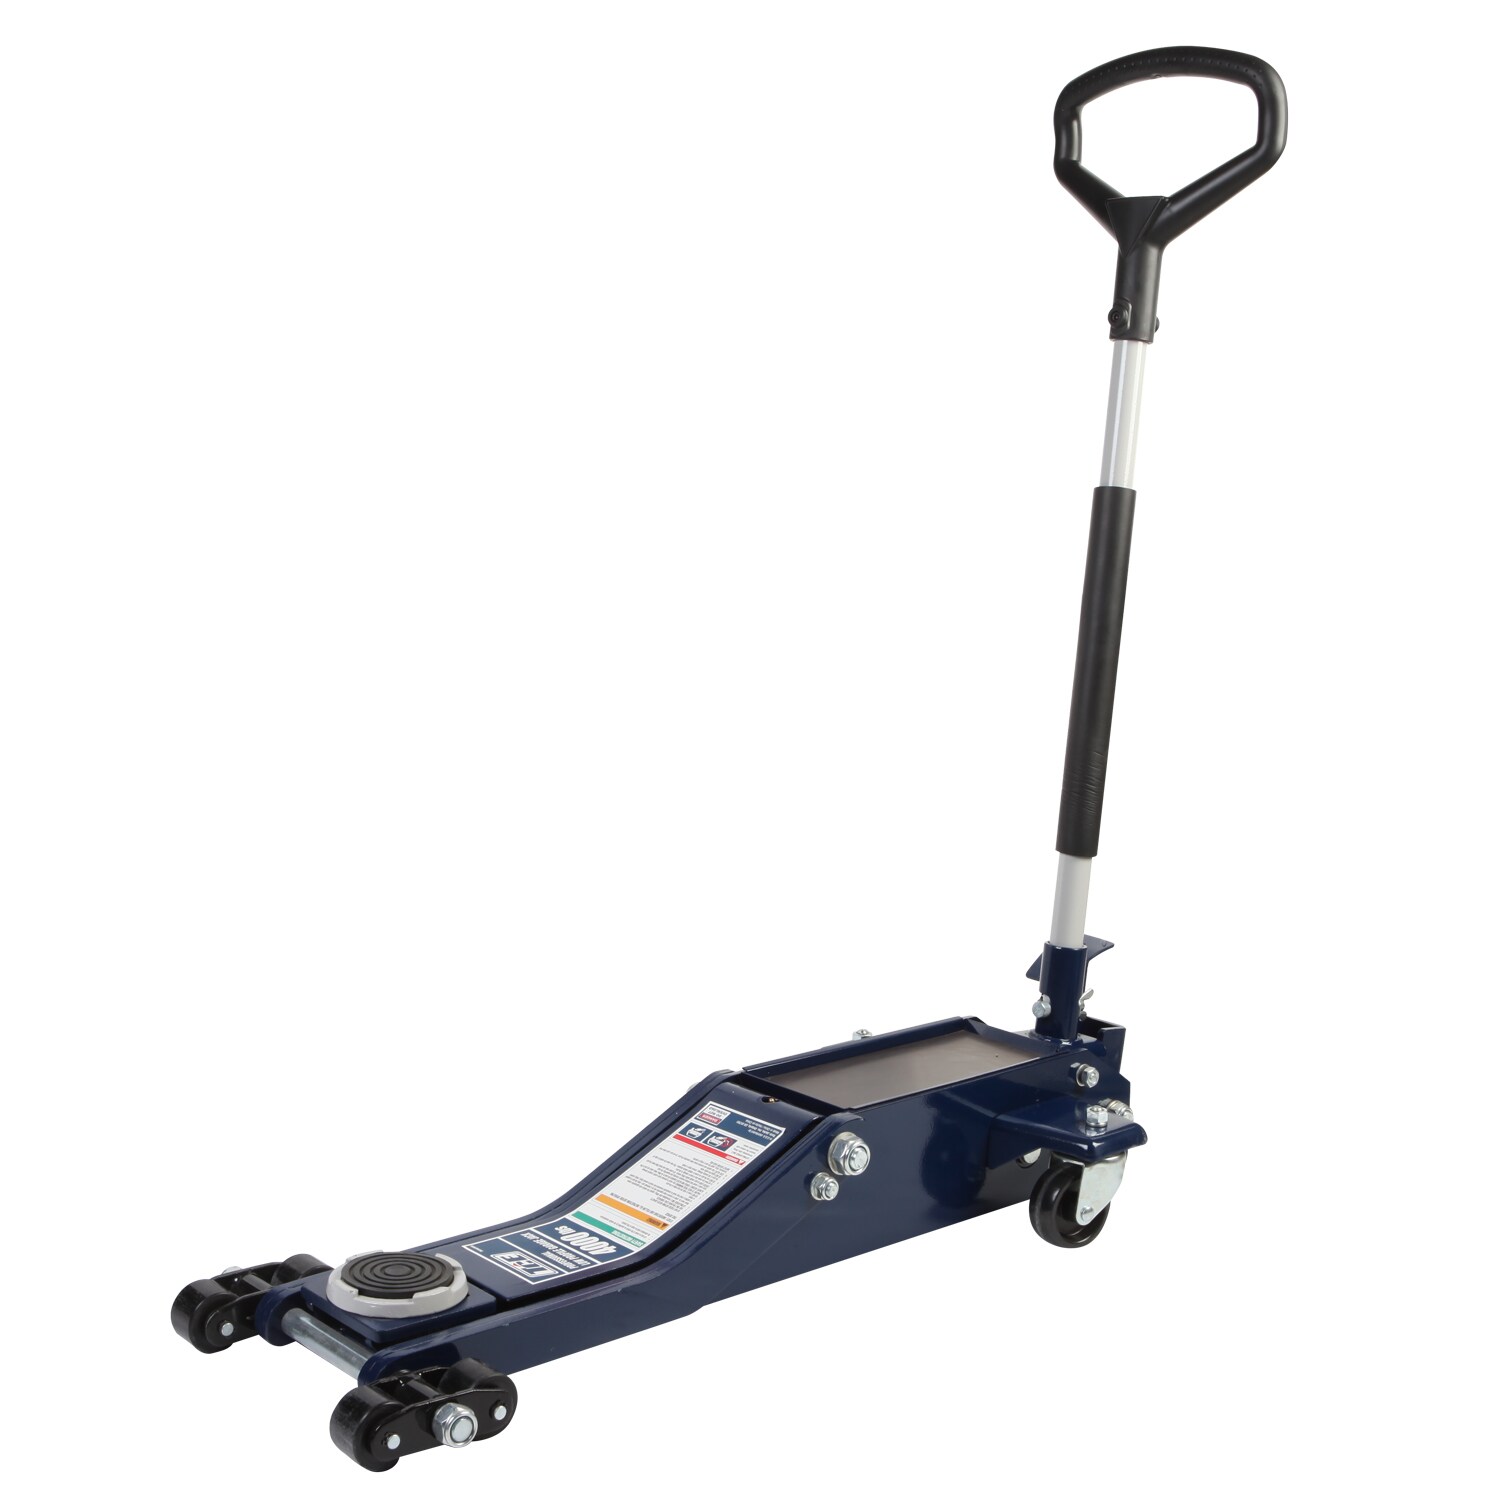 TCE TCE82002 Torin Hydraulic Ultra Low Profile Floor Jack with Single Piston Quick Lift Pump 4,000 lb 2 Ton Capacity 